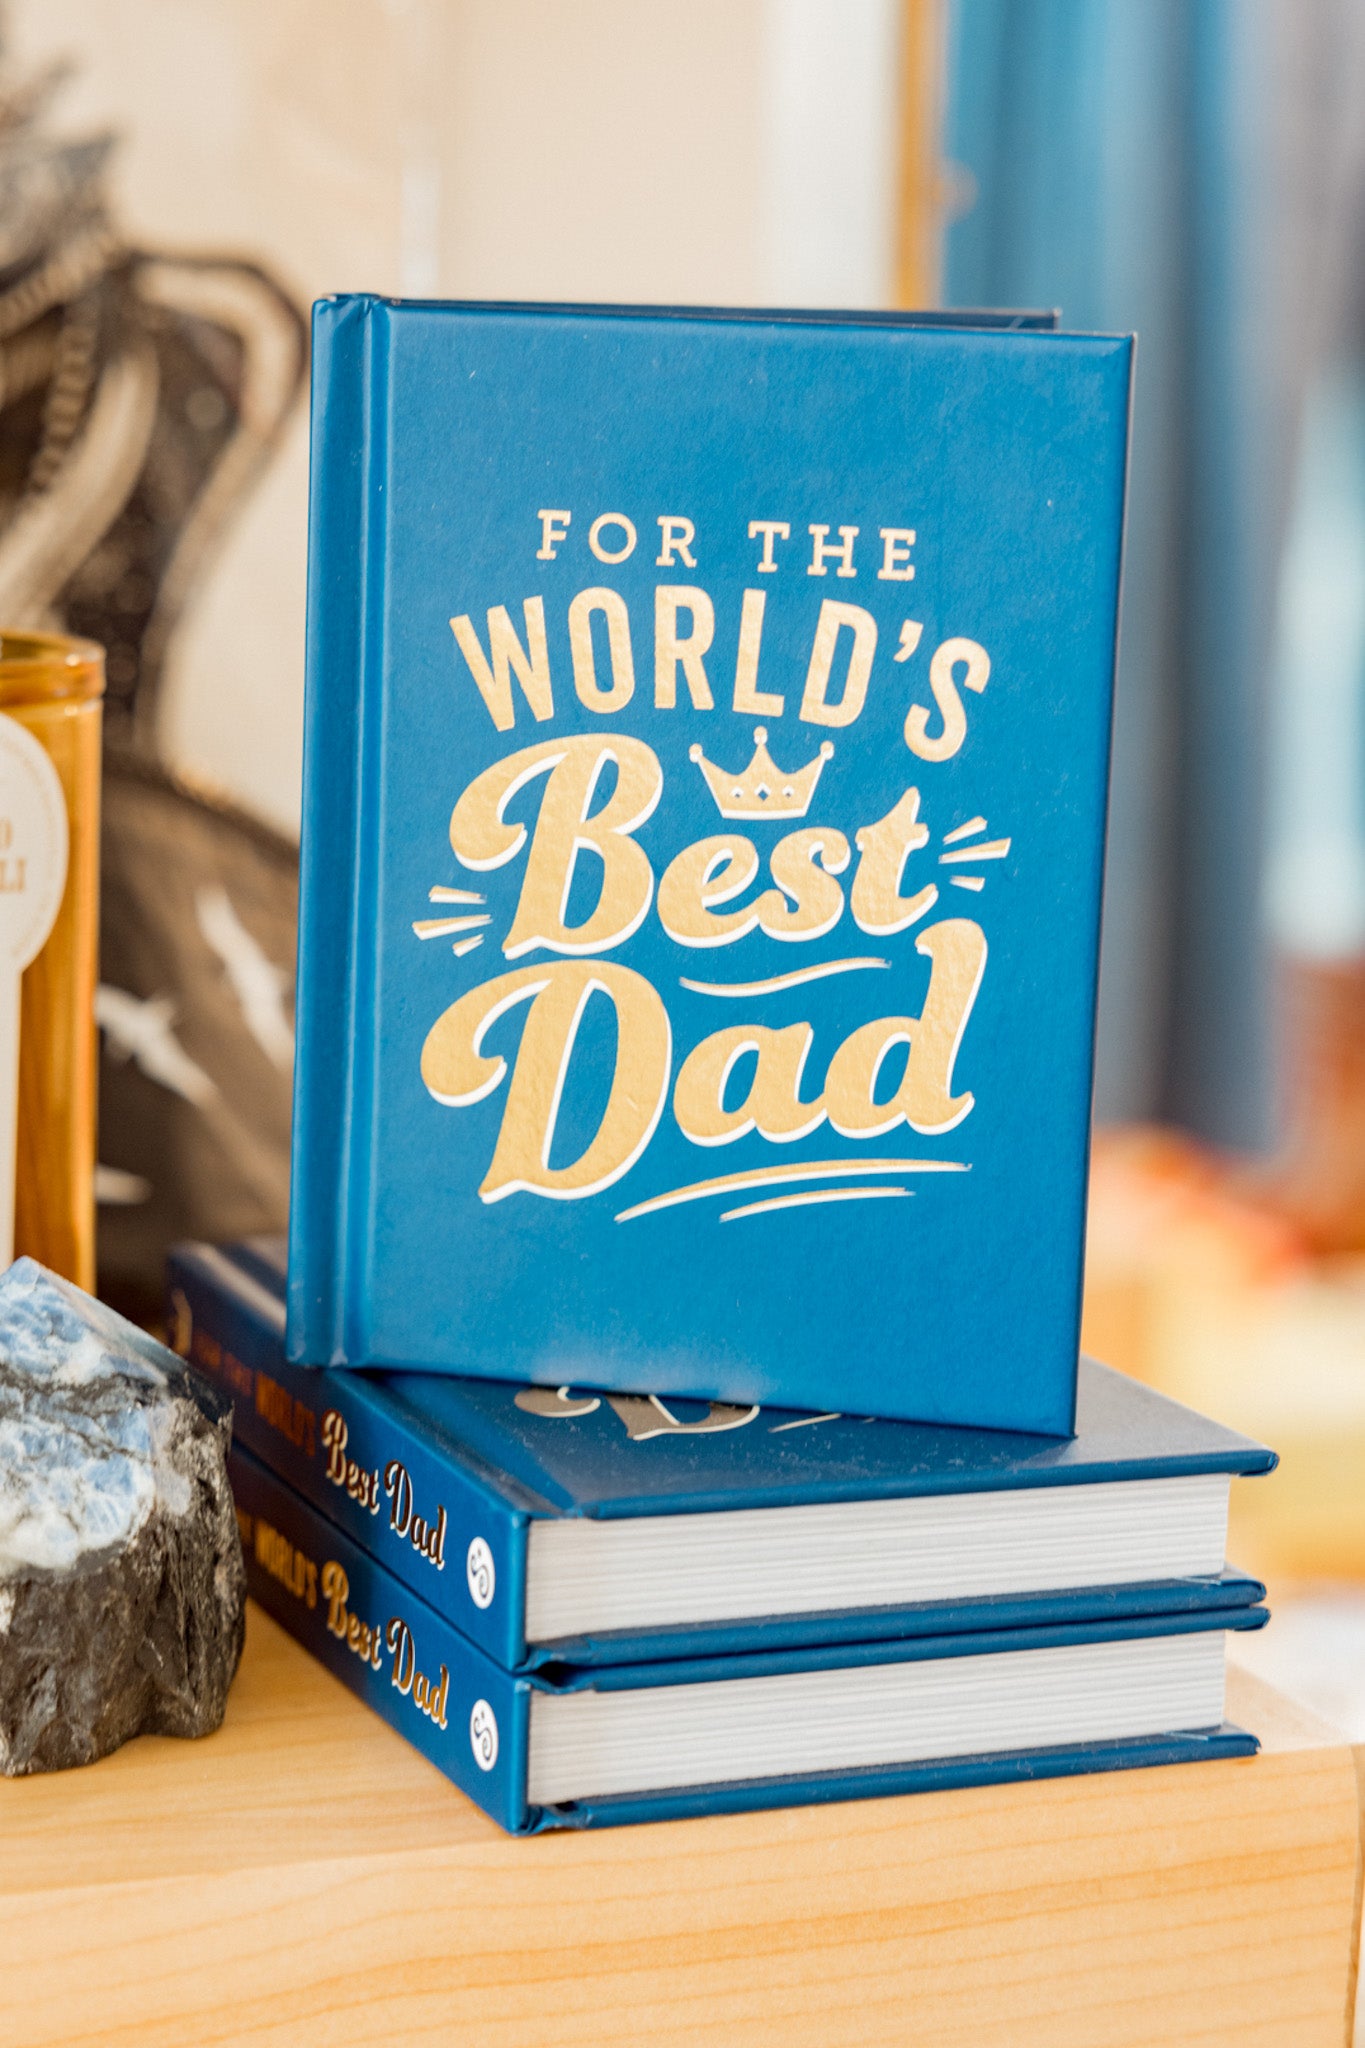 For the World's Best Dad Book